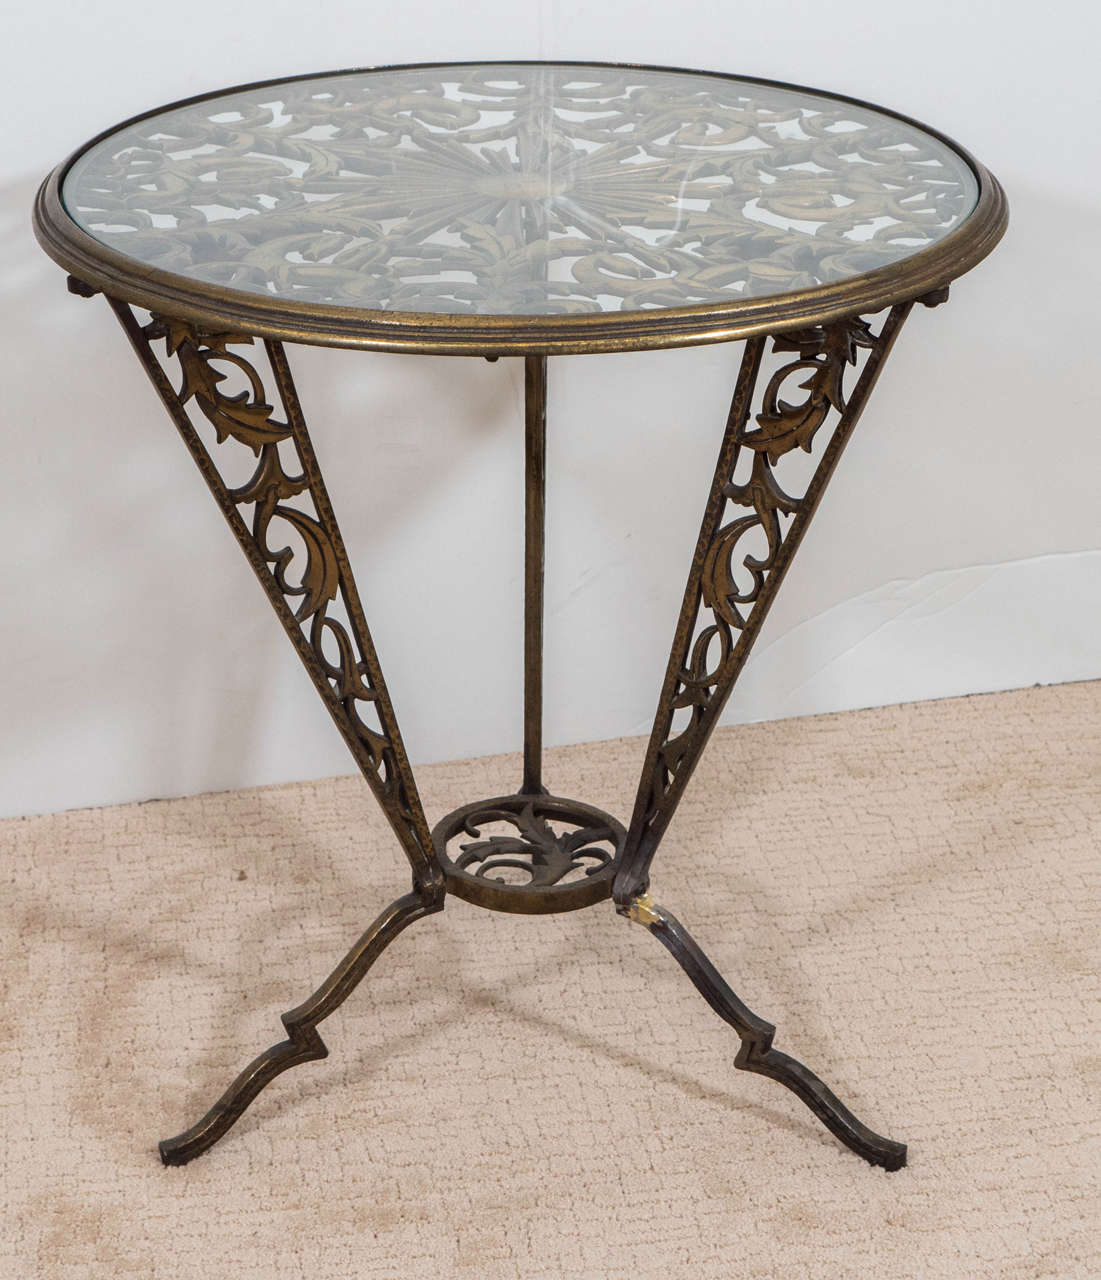 A vintage pair of Art Deco occasional tables in gilded wrought iron, produced circa 1930s by Karl Hagenauer for Rena Rosenthal, with brass-plated circular frame, inset with glass table top, supported by decorative plate, with circling equestrian